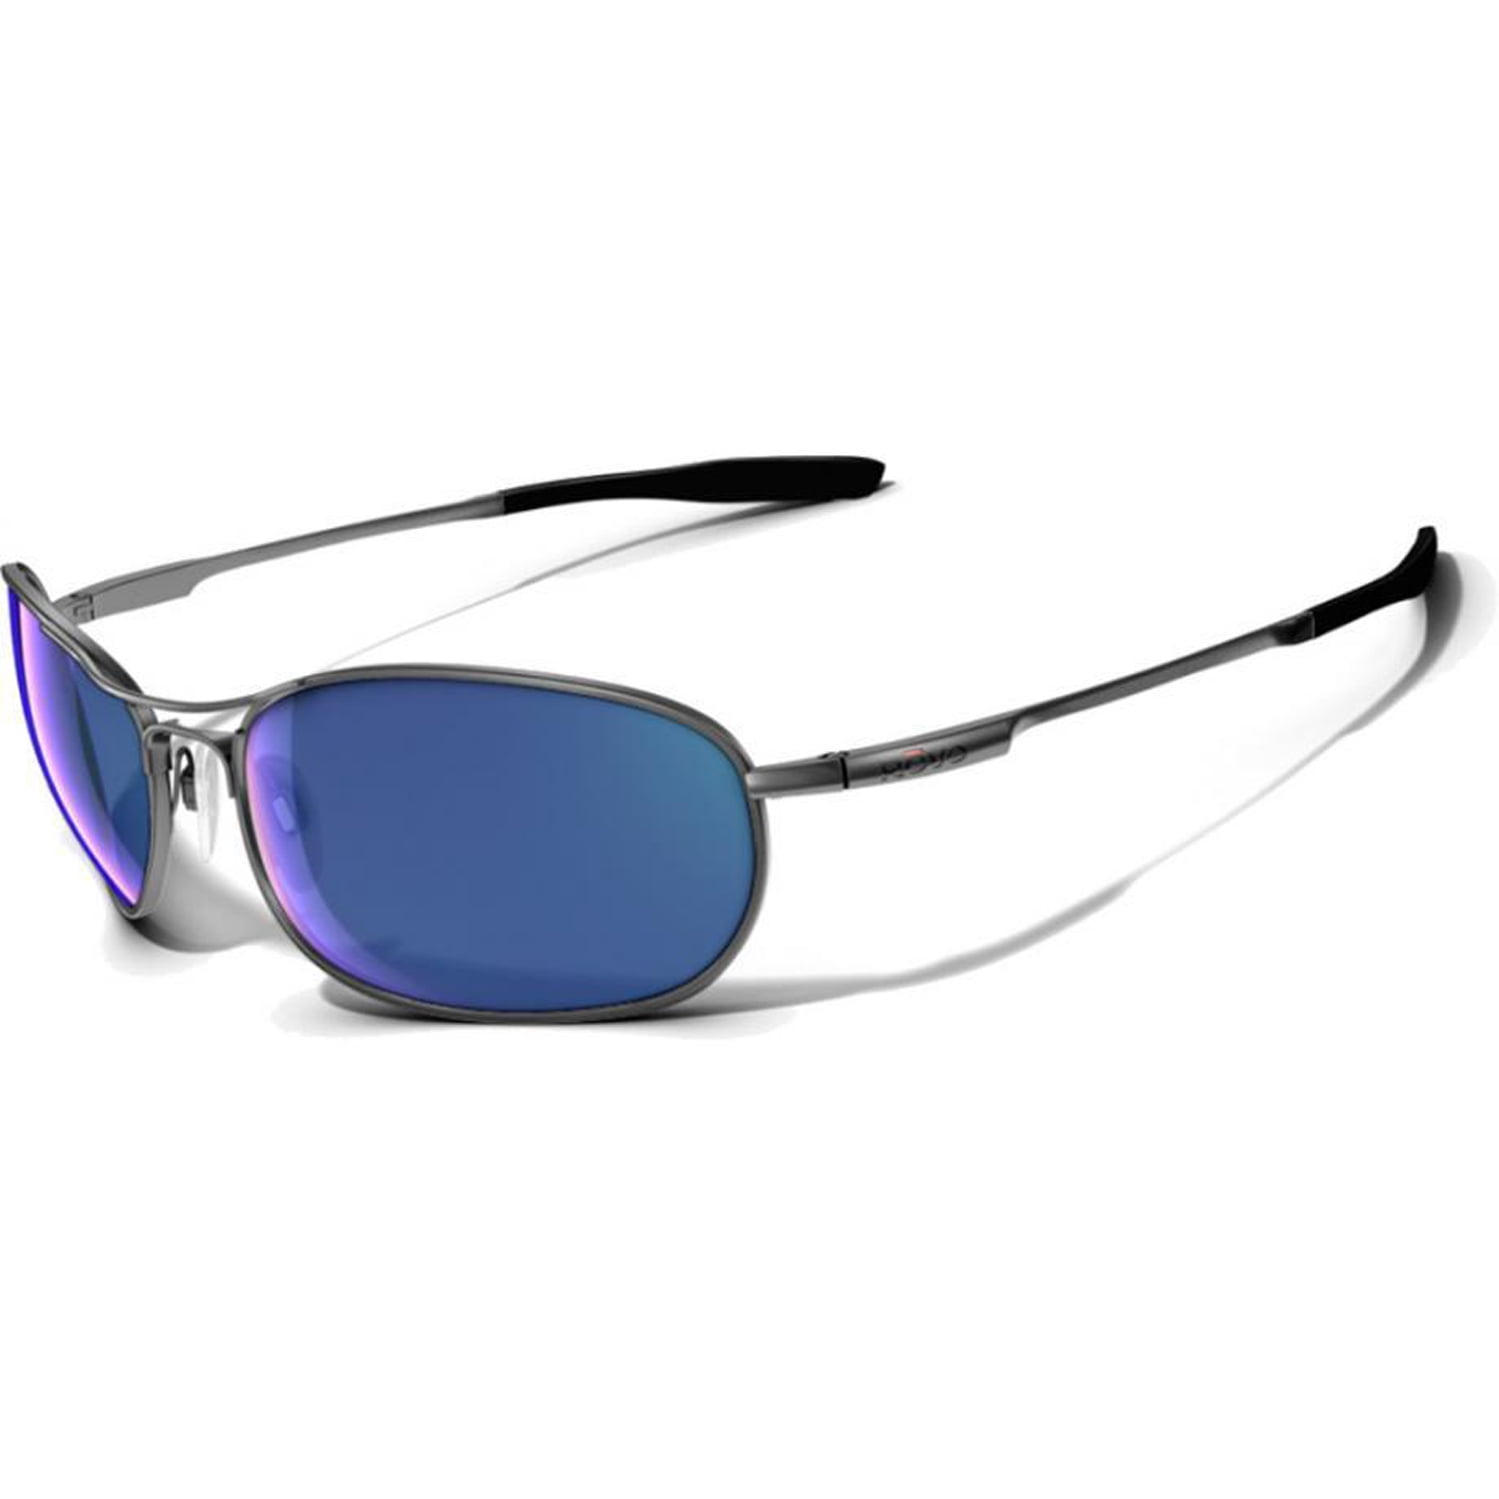 THE DARKEST TRANSITIONS™ SUNGLASSES FOR BIKERS: THE ECLIPSE XT » Bikershades